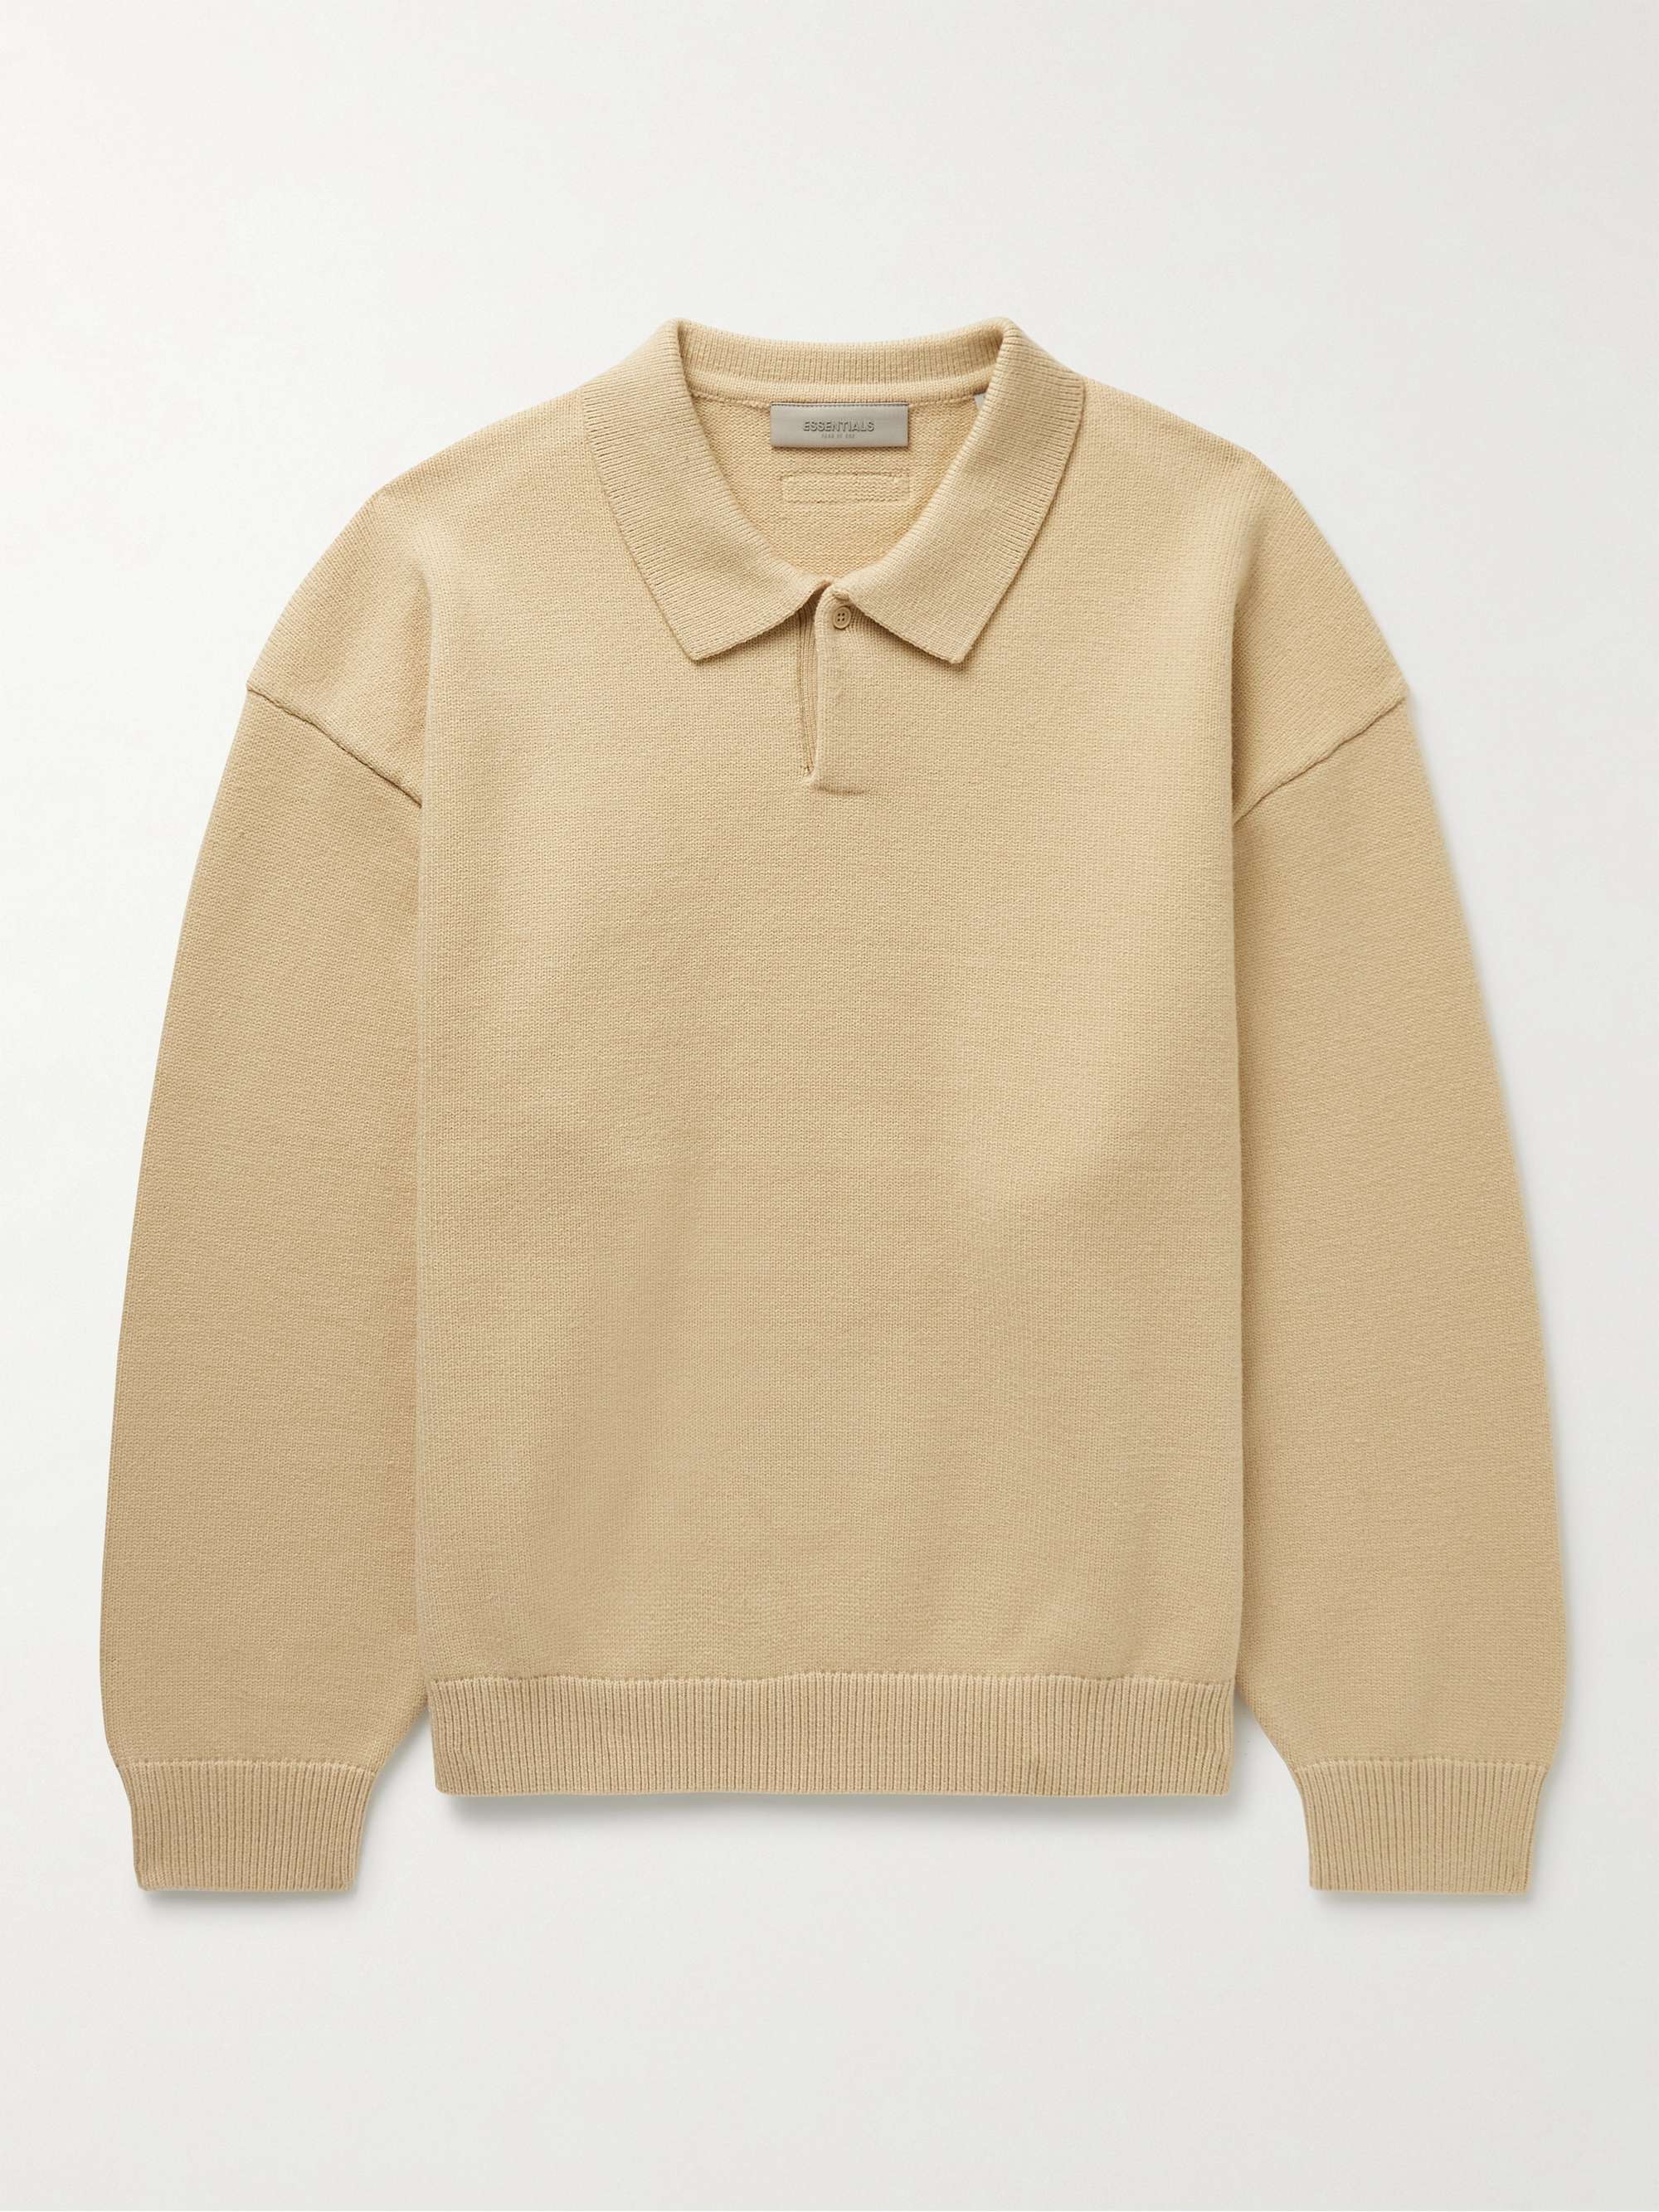 FEAR OF GOD ESSENTIALS Oversized Knitted Polo Sweater for Men | MR PORTER